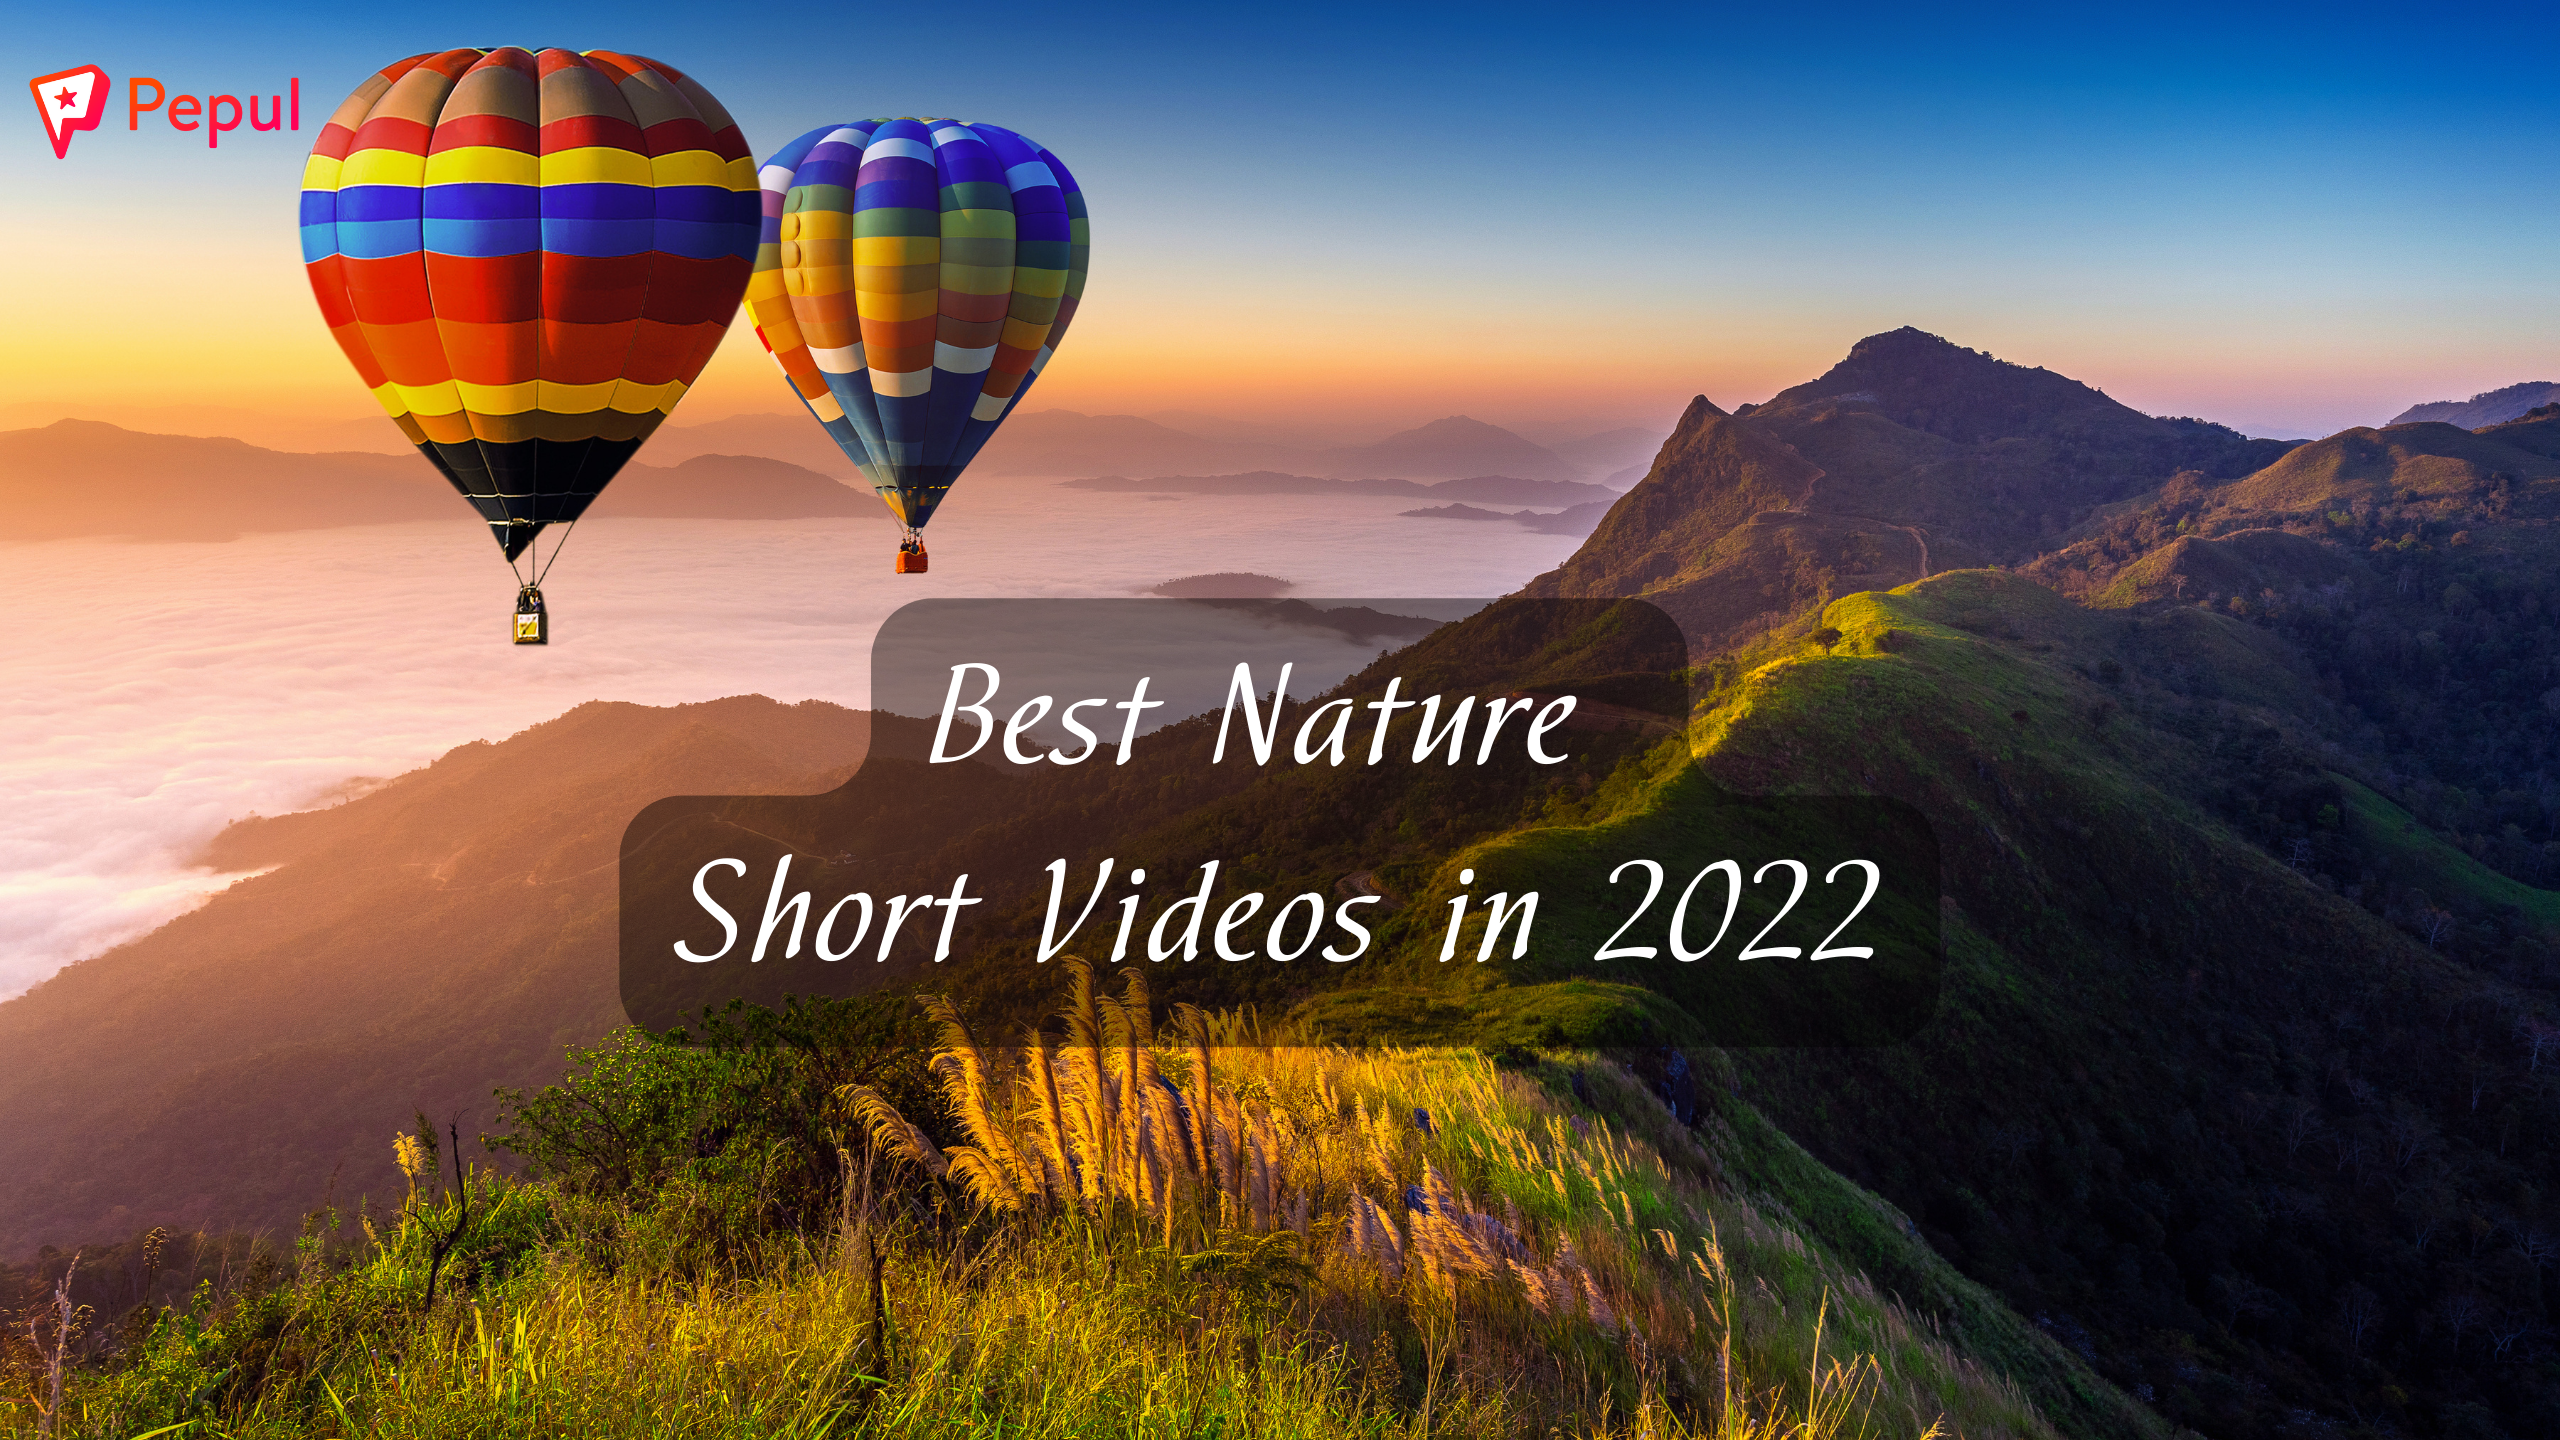 Top 5 Best Nature and Landscapes Short Videos In 2022